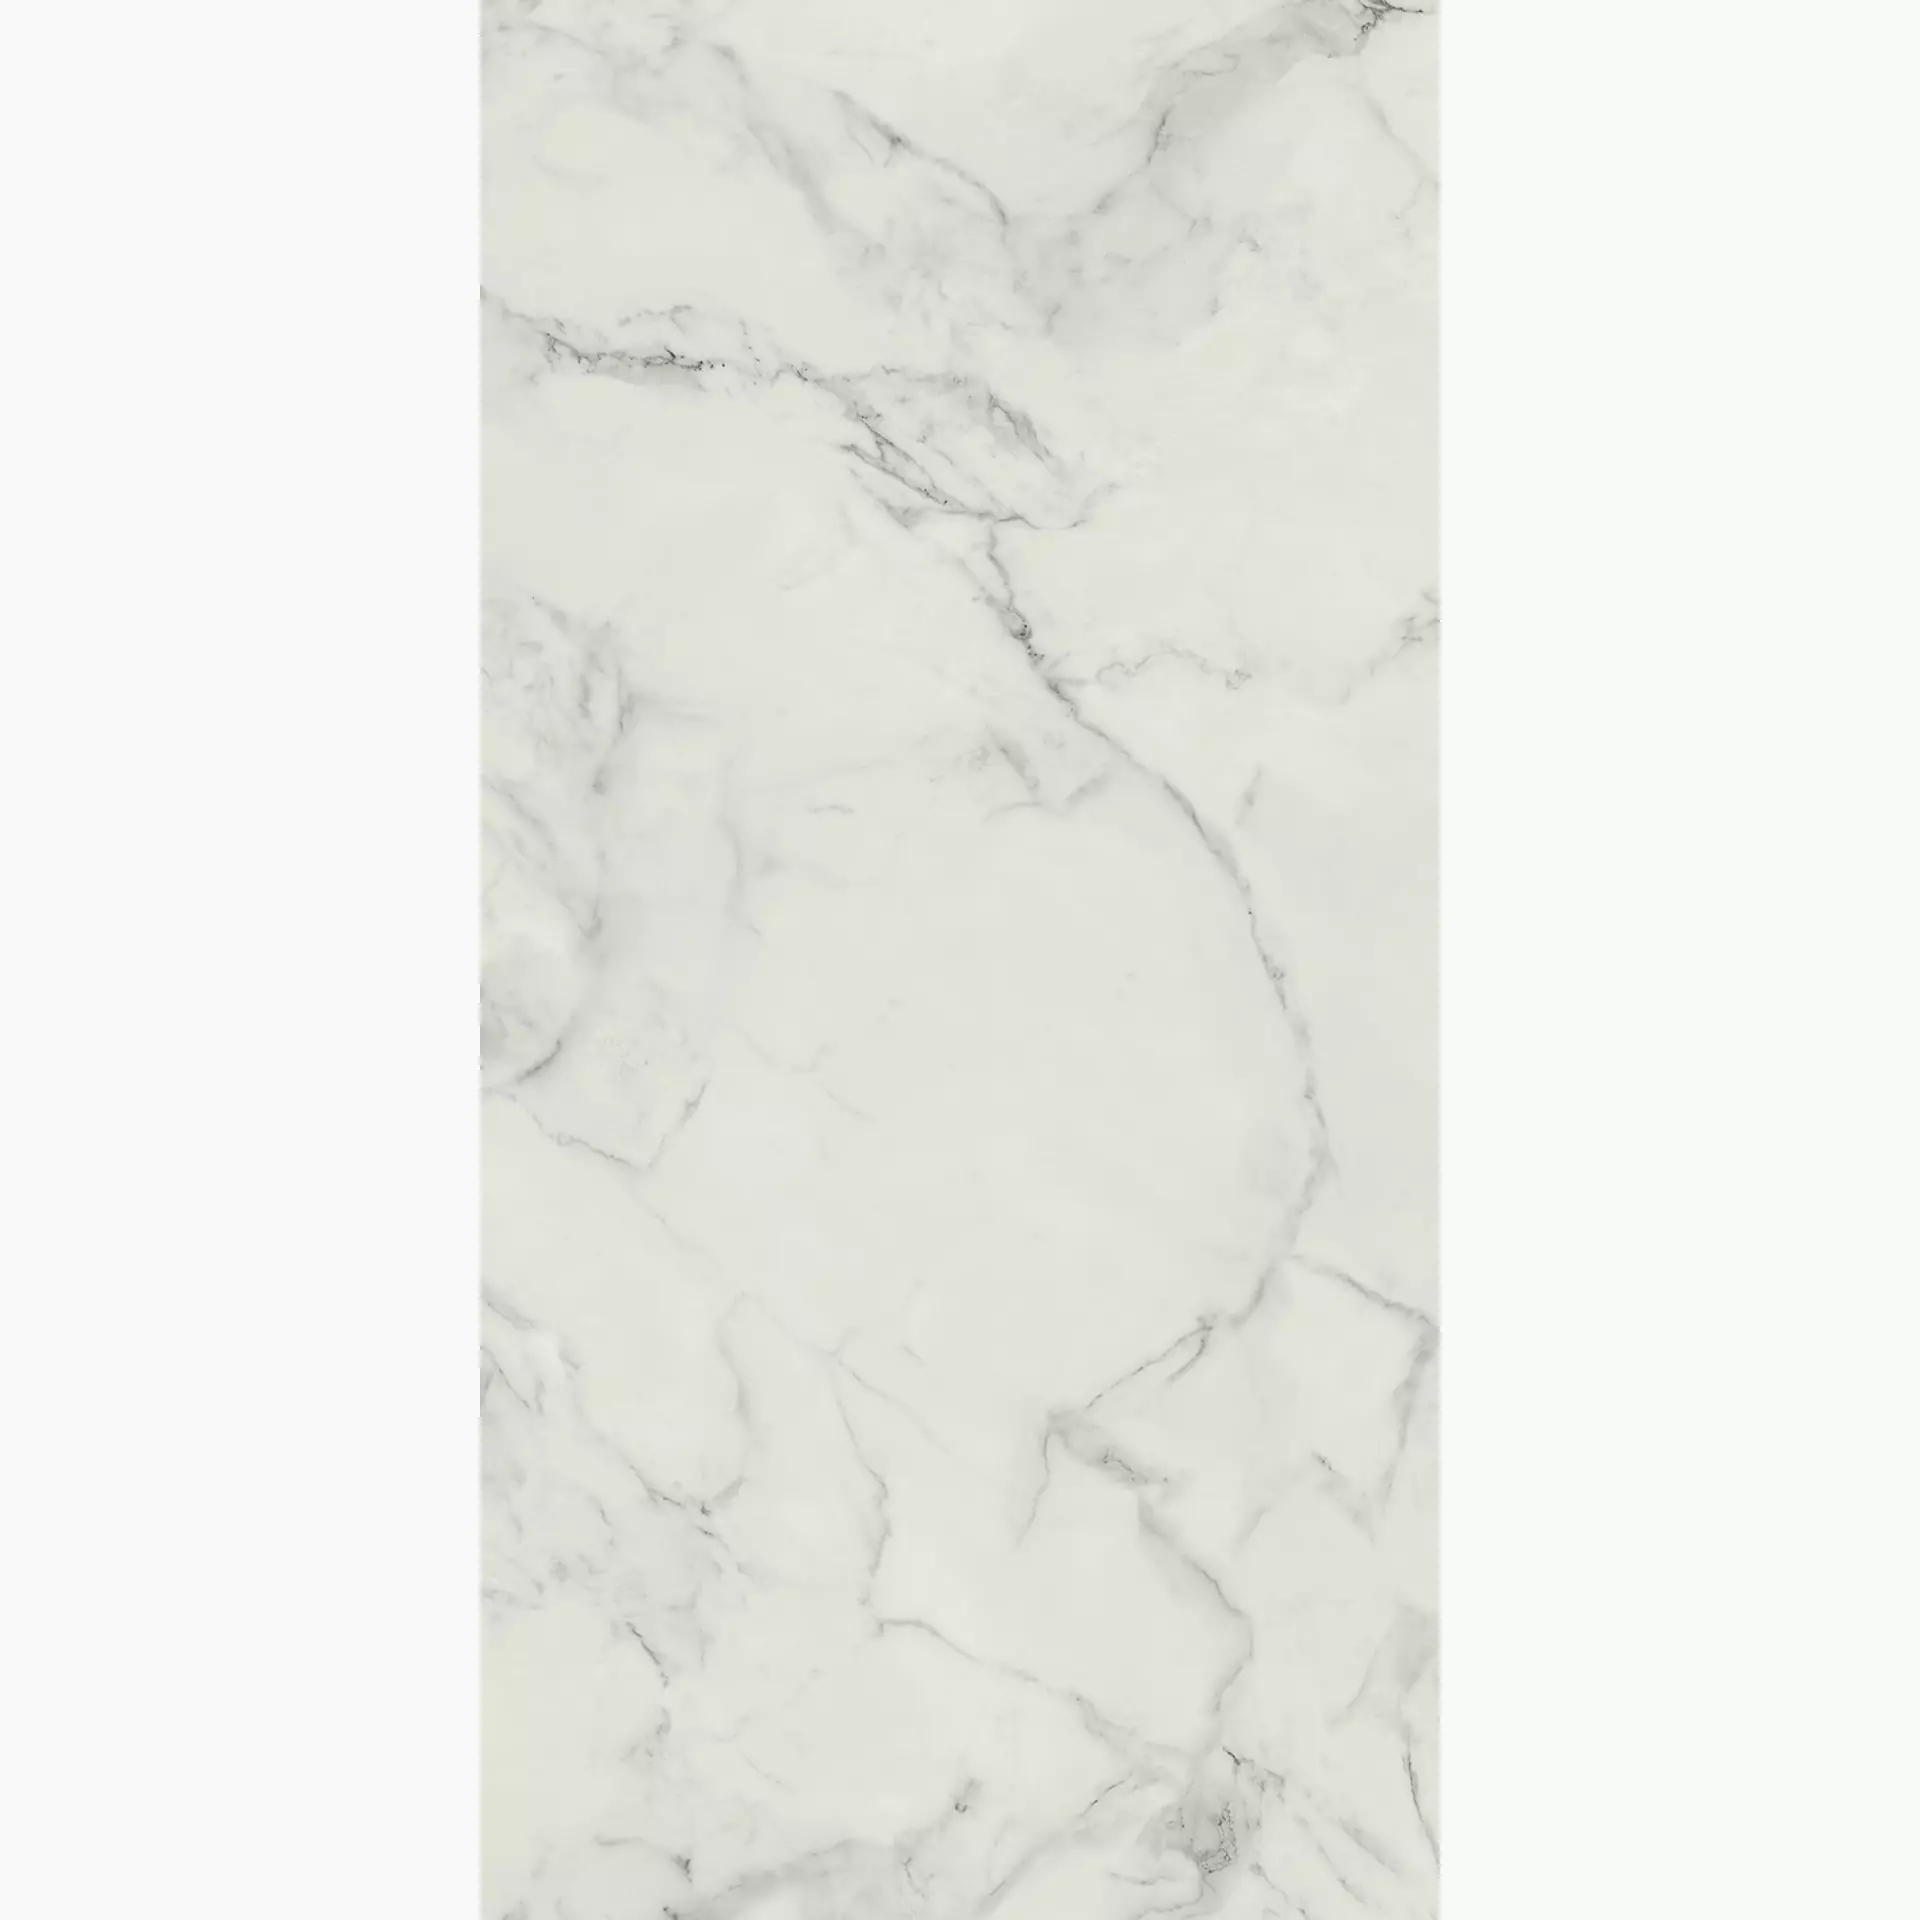 Villeroy & Boch Marble Arch Magic White Polished 2730-MA0P 60x120cm rectified 9mm